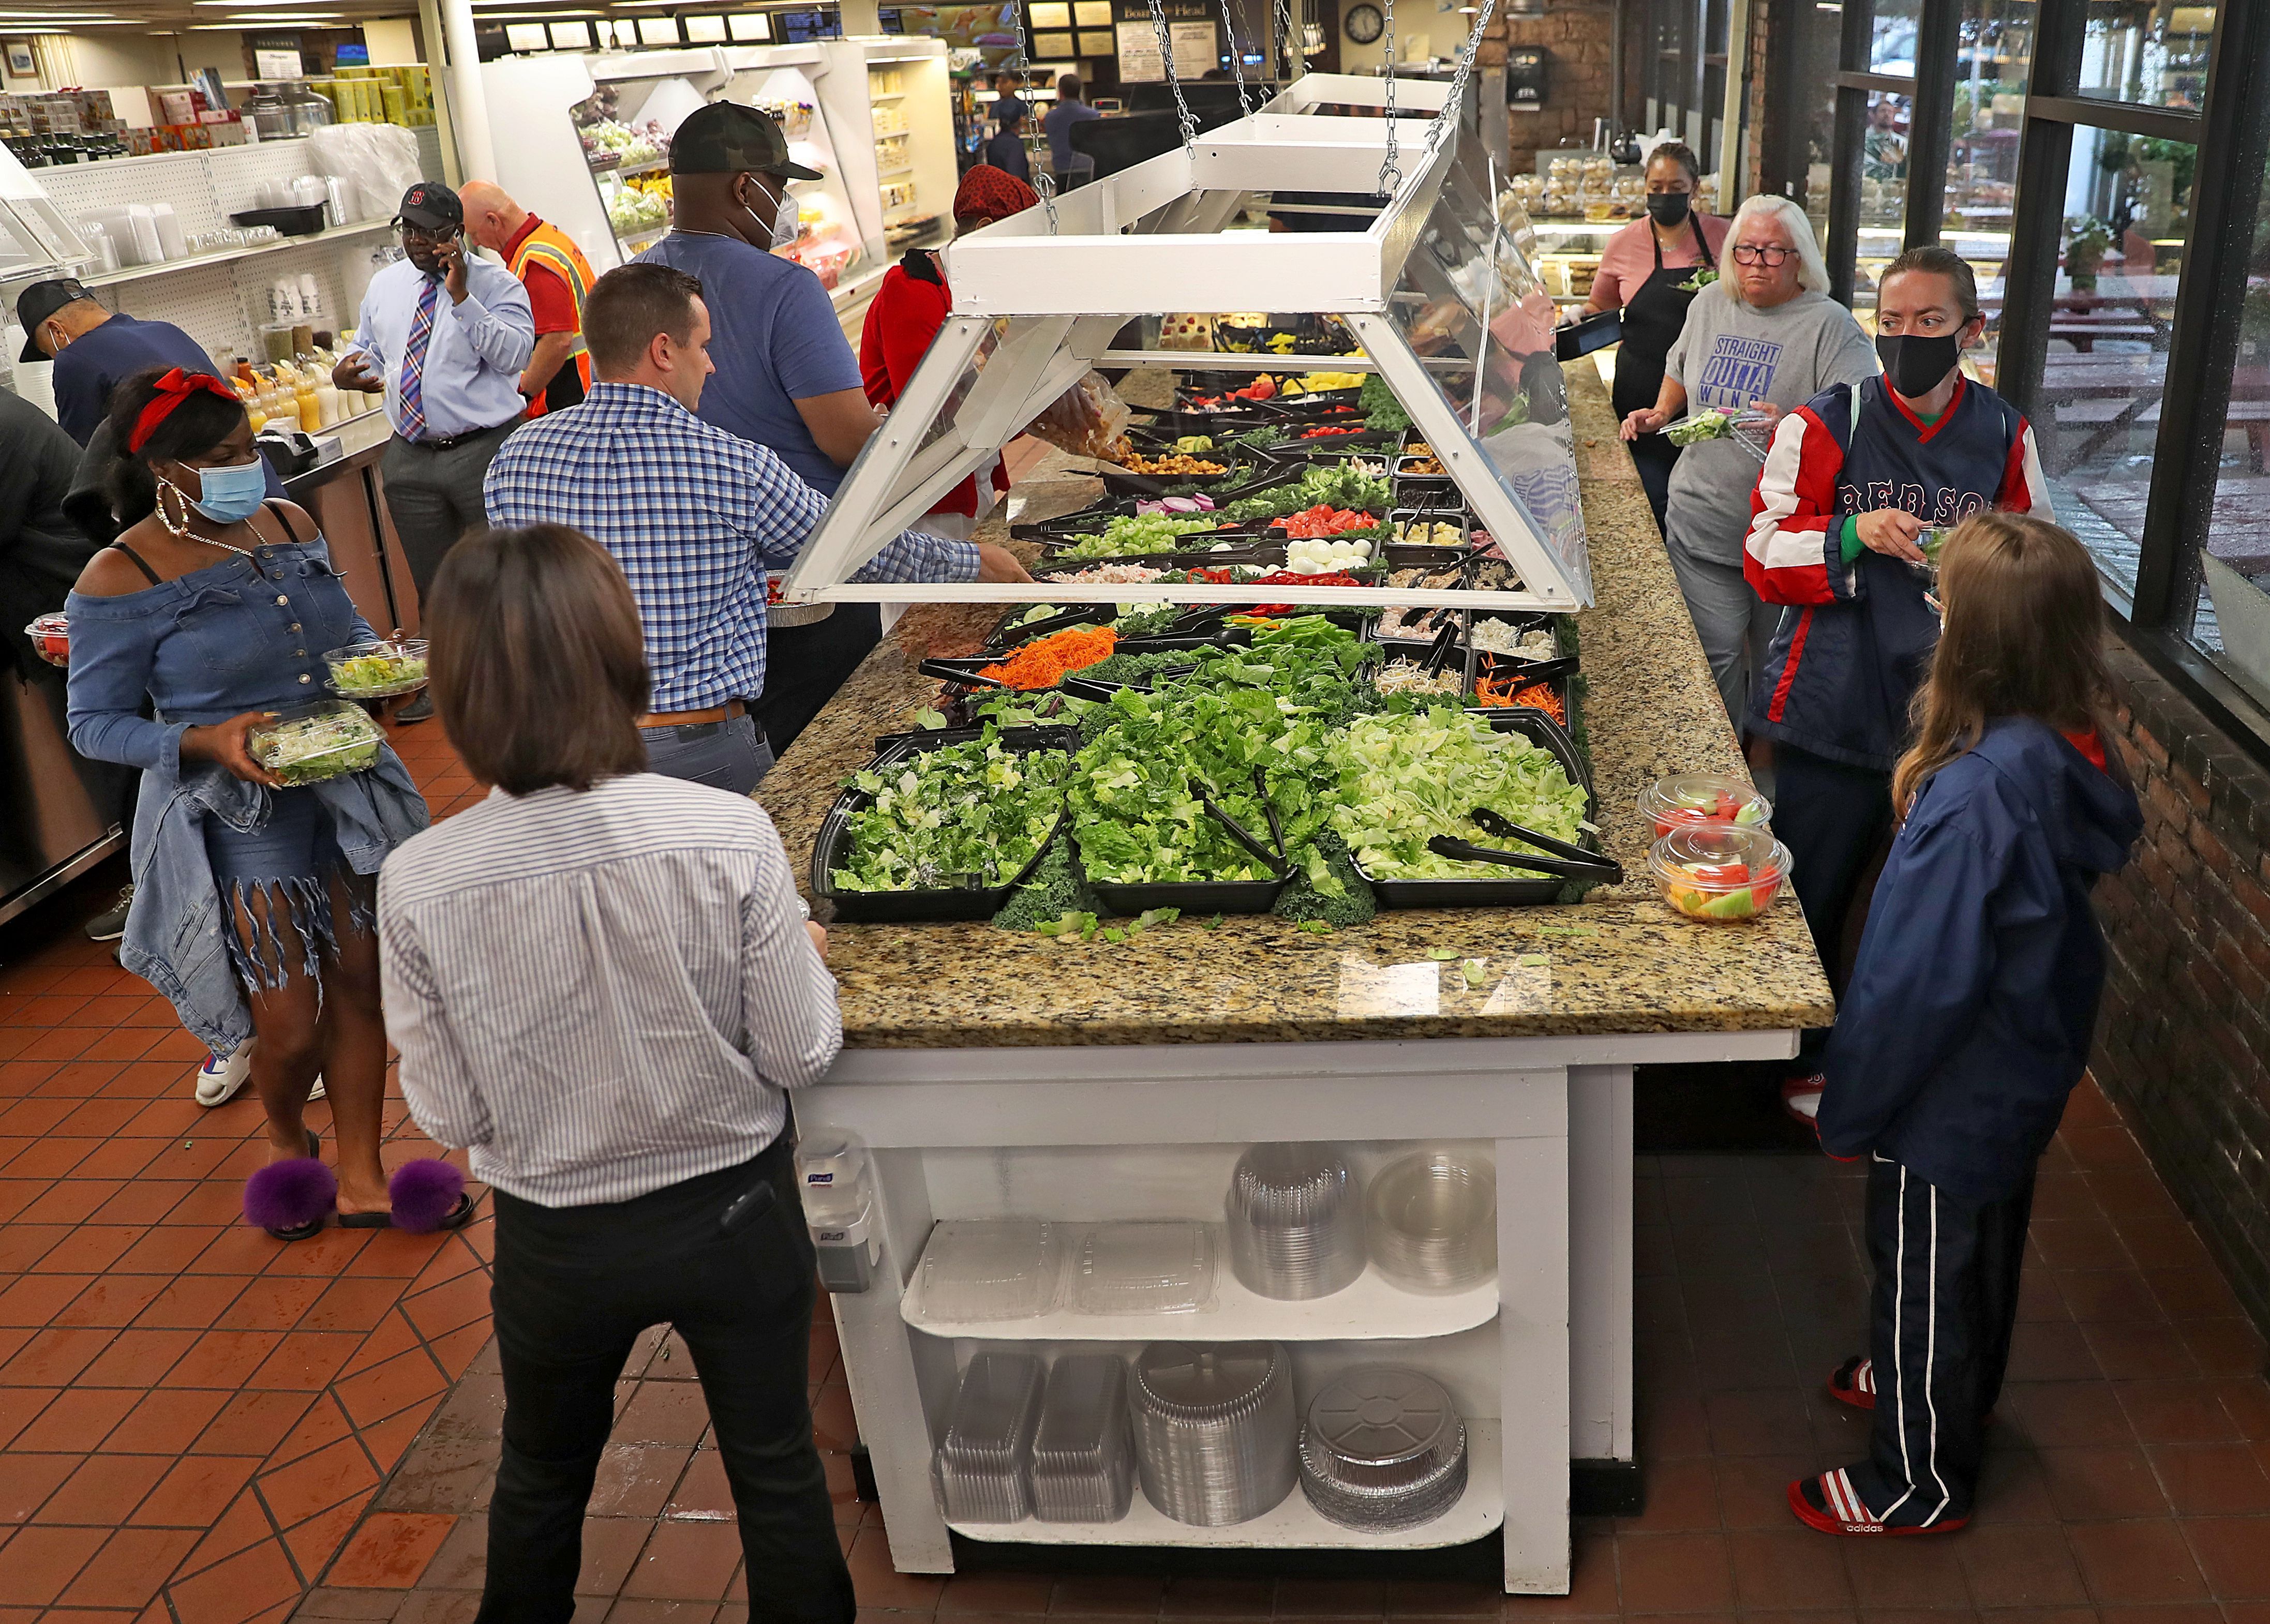 People enjoy the opening of the salad bar at Lambert's Market in Boston's Dorchester after the easing of coronavirus restrictions in Massachusetts on June 14. 